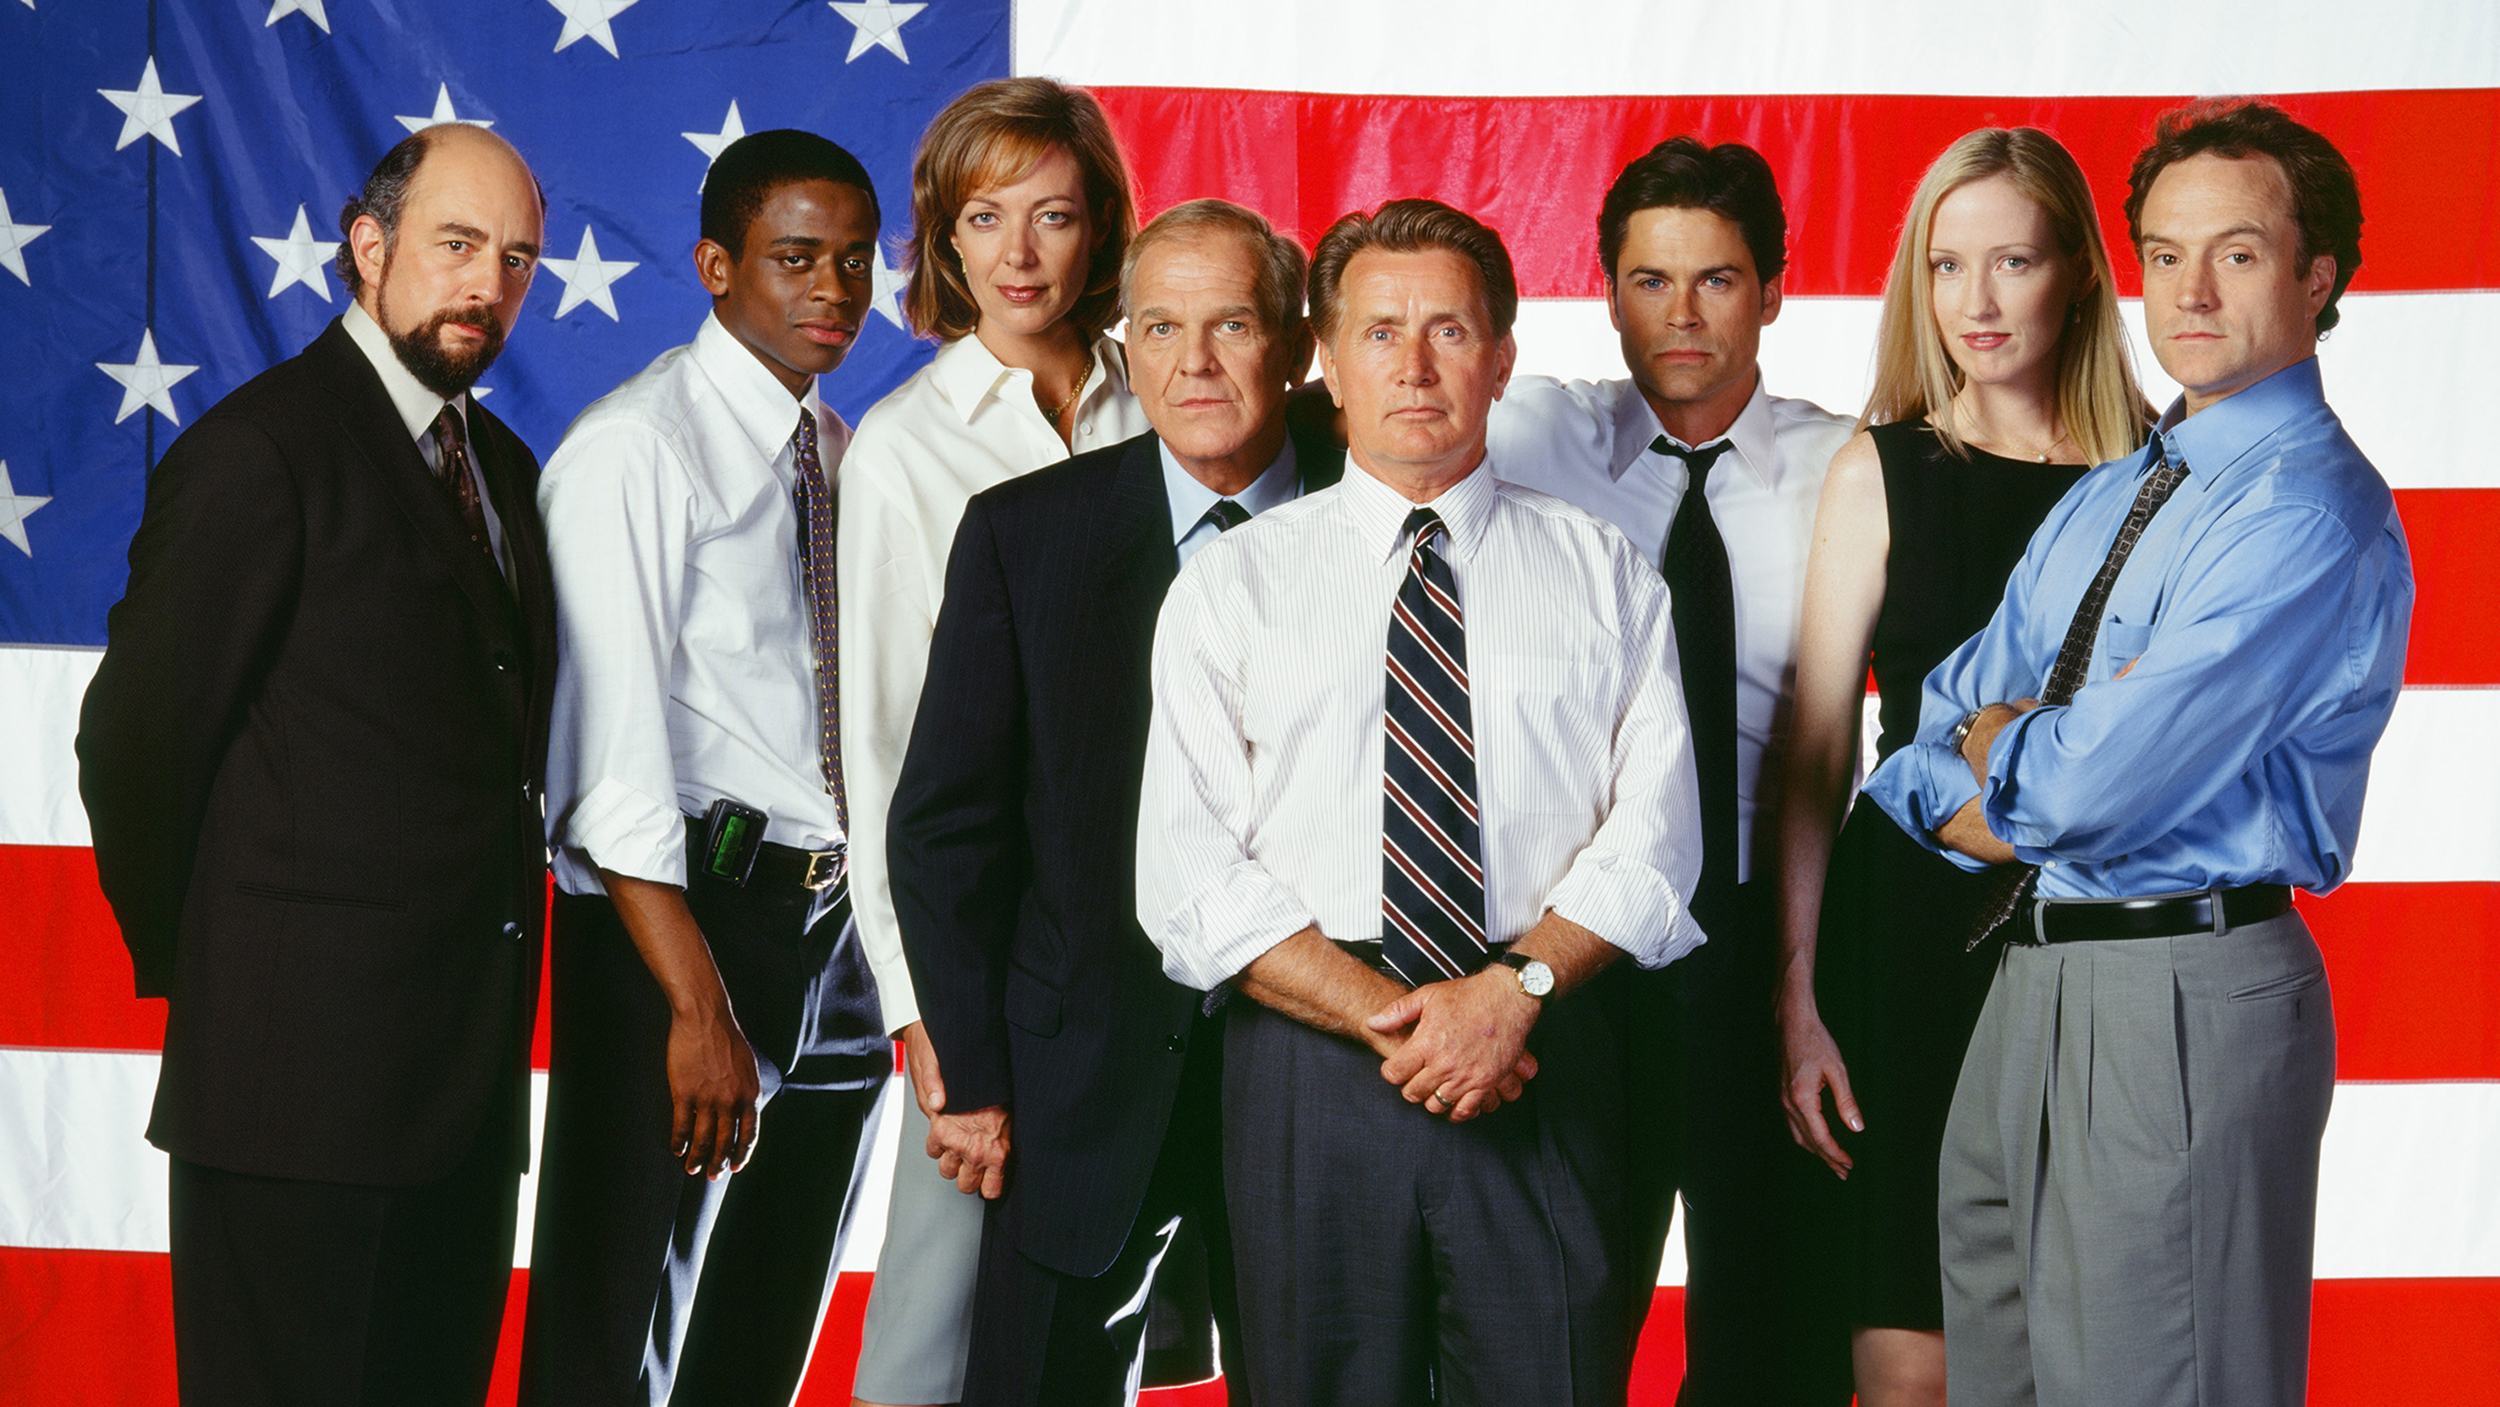 The West Wing Pics, TV Show Collection